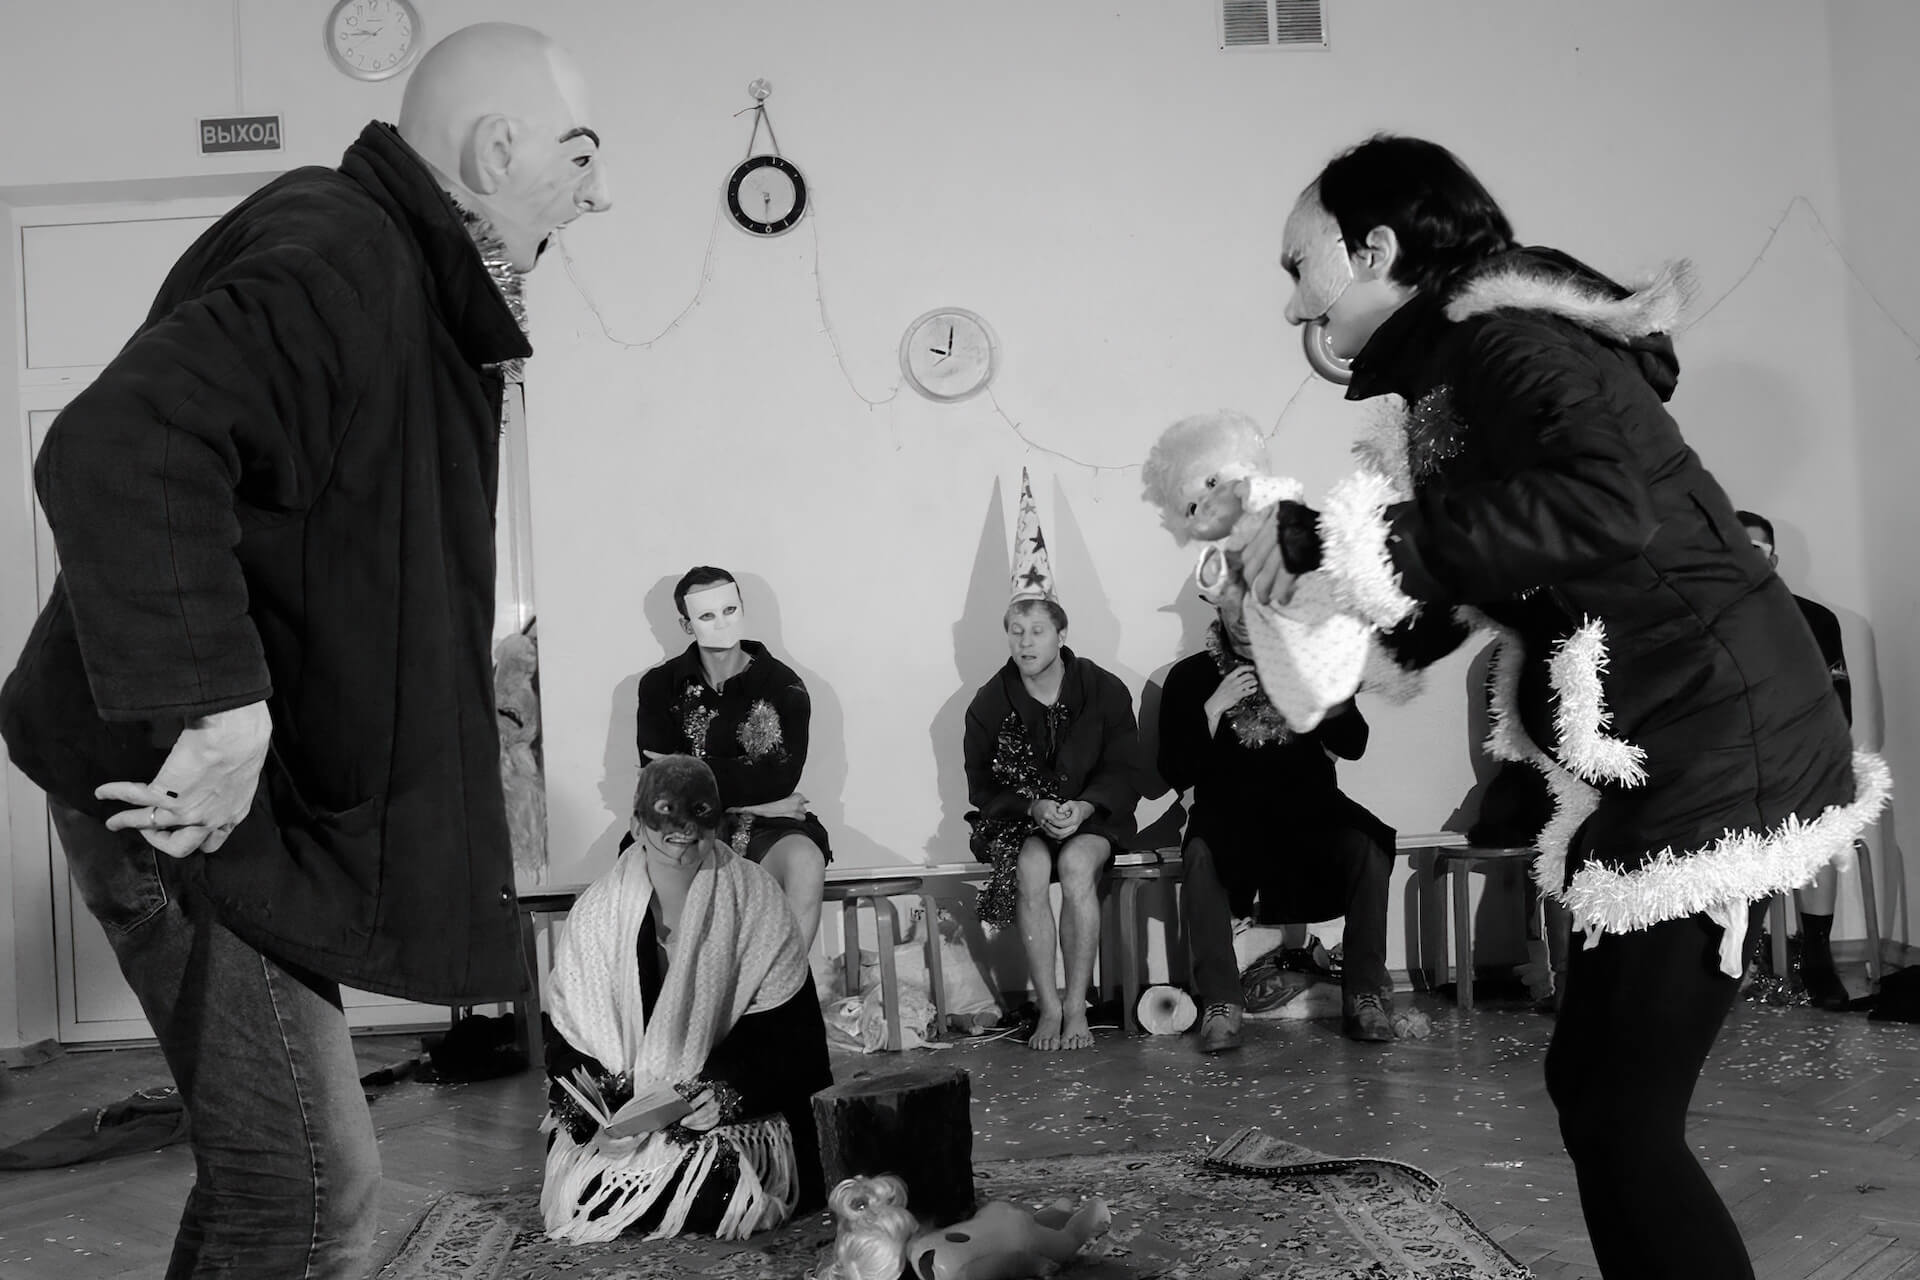 Black and white image of two performers with masks arguing. The rests are sitting behind watching.